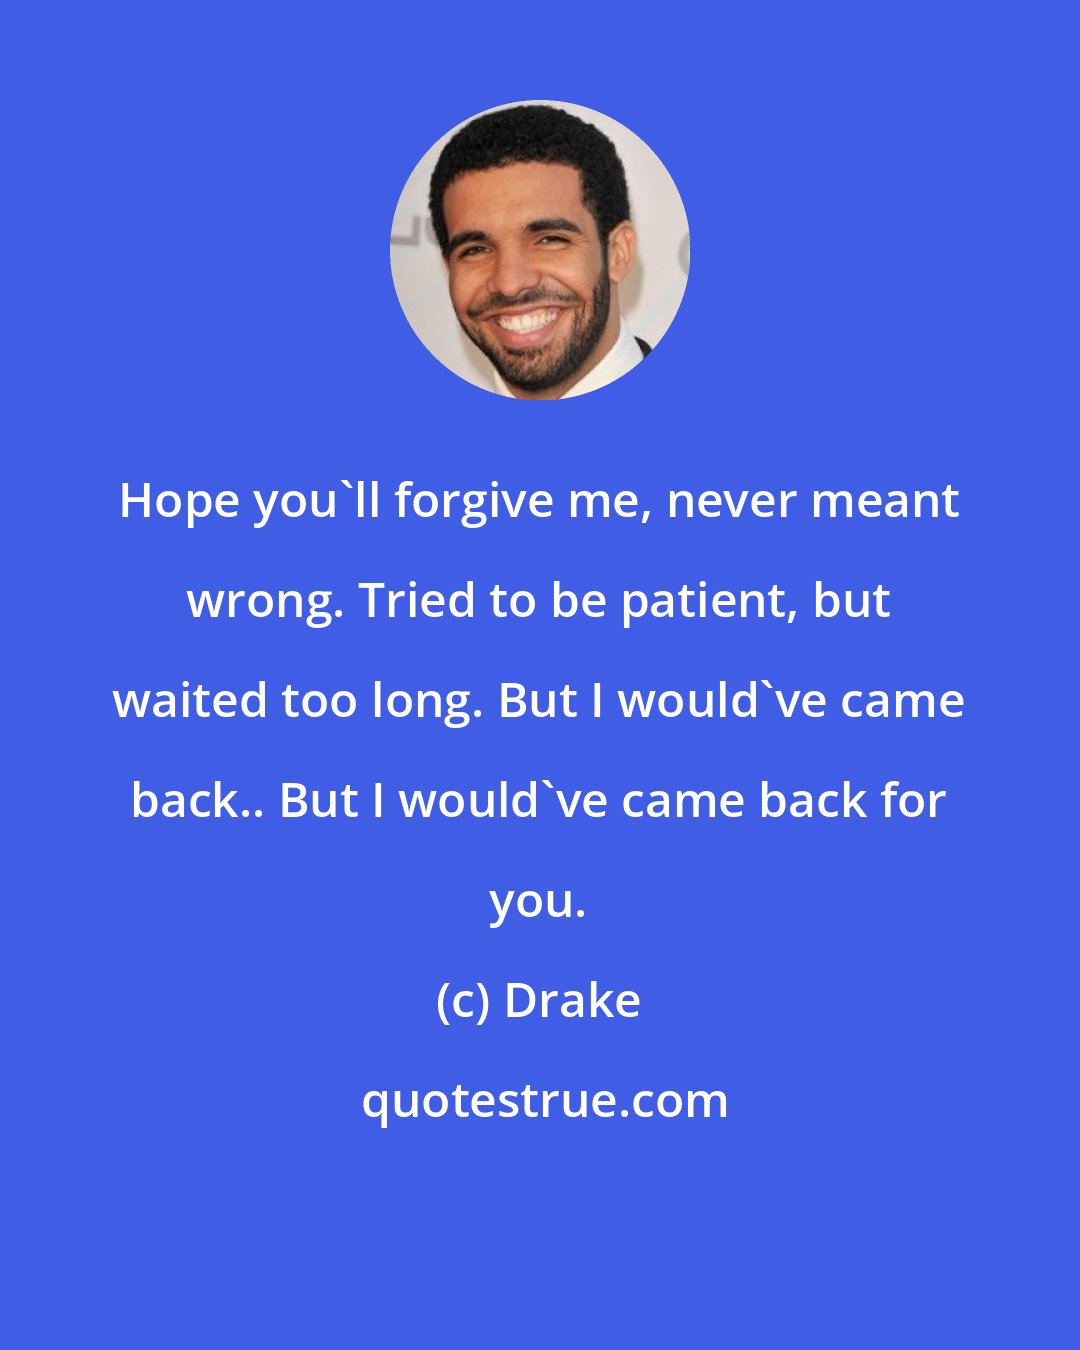 Drake: Hope you'll forgive me, never meant wrong. Tried to be patient, but waited too long. But I would've came back.. But I would've came back for you.